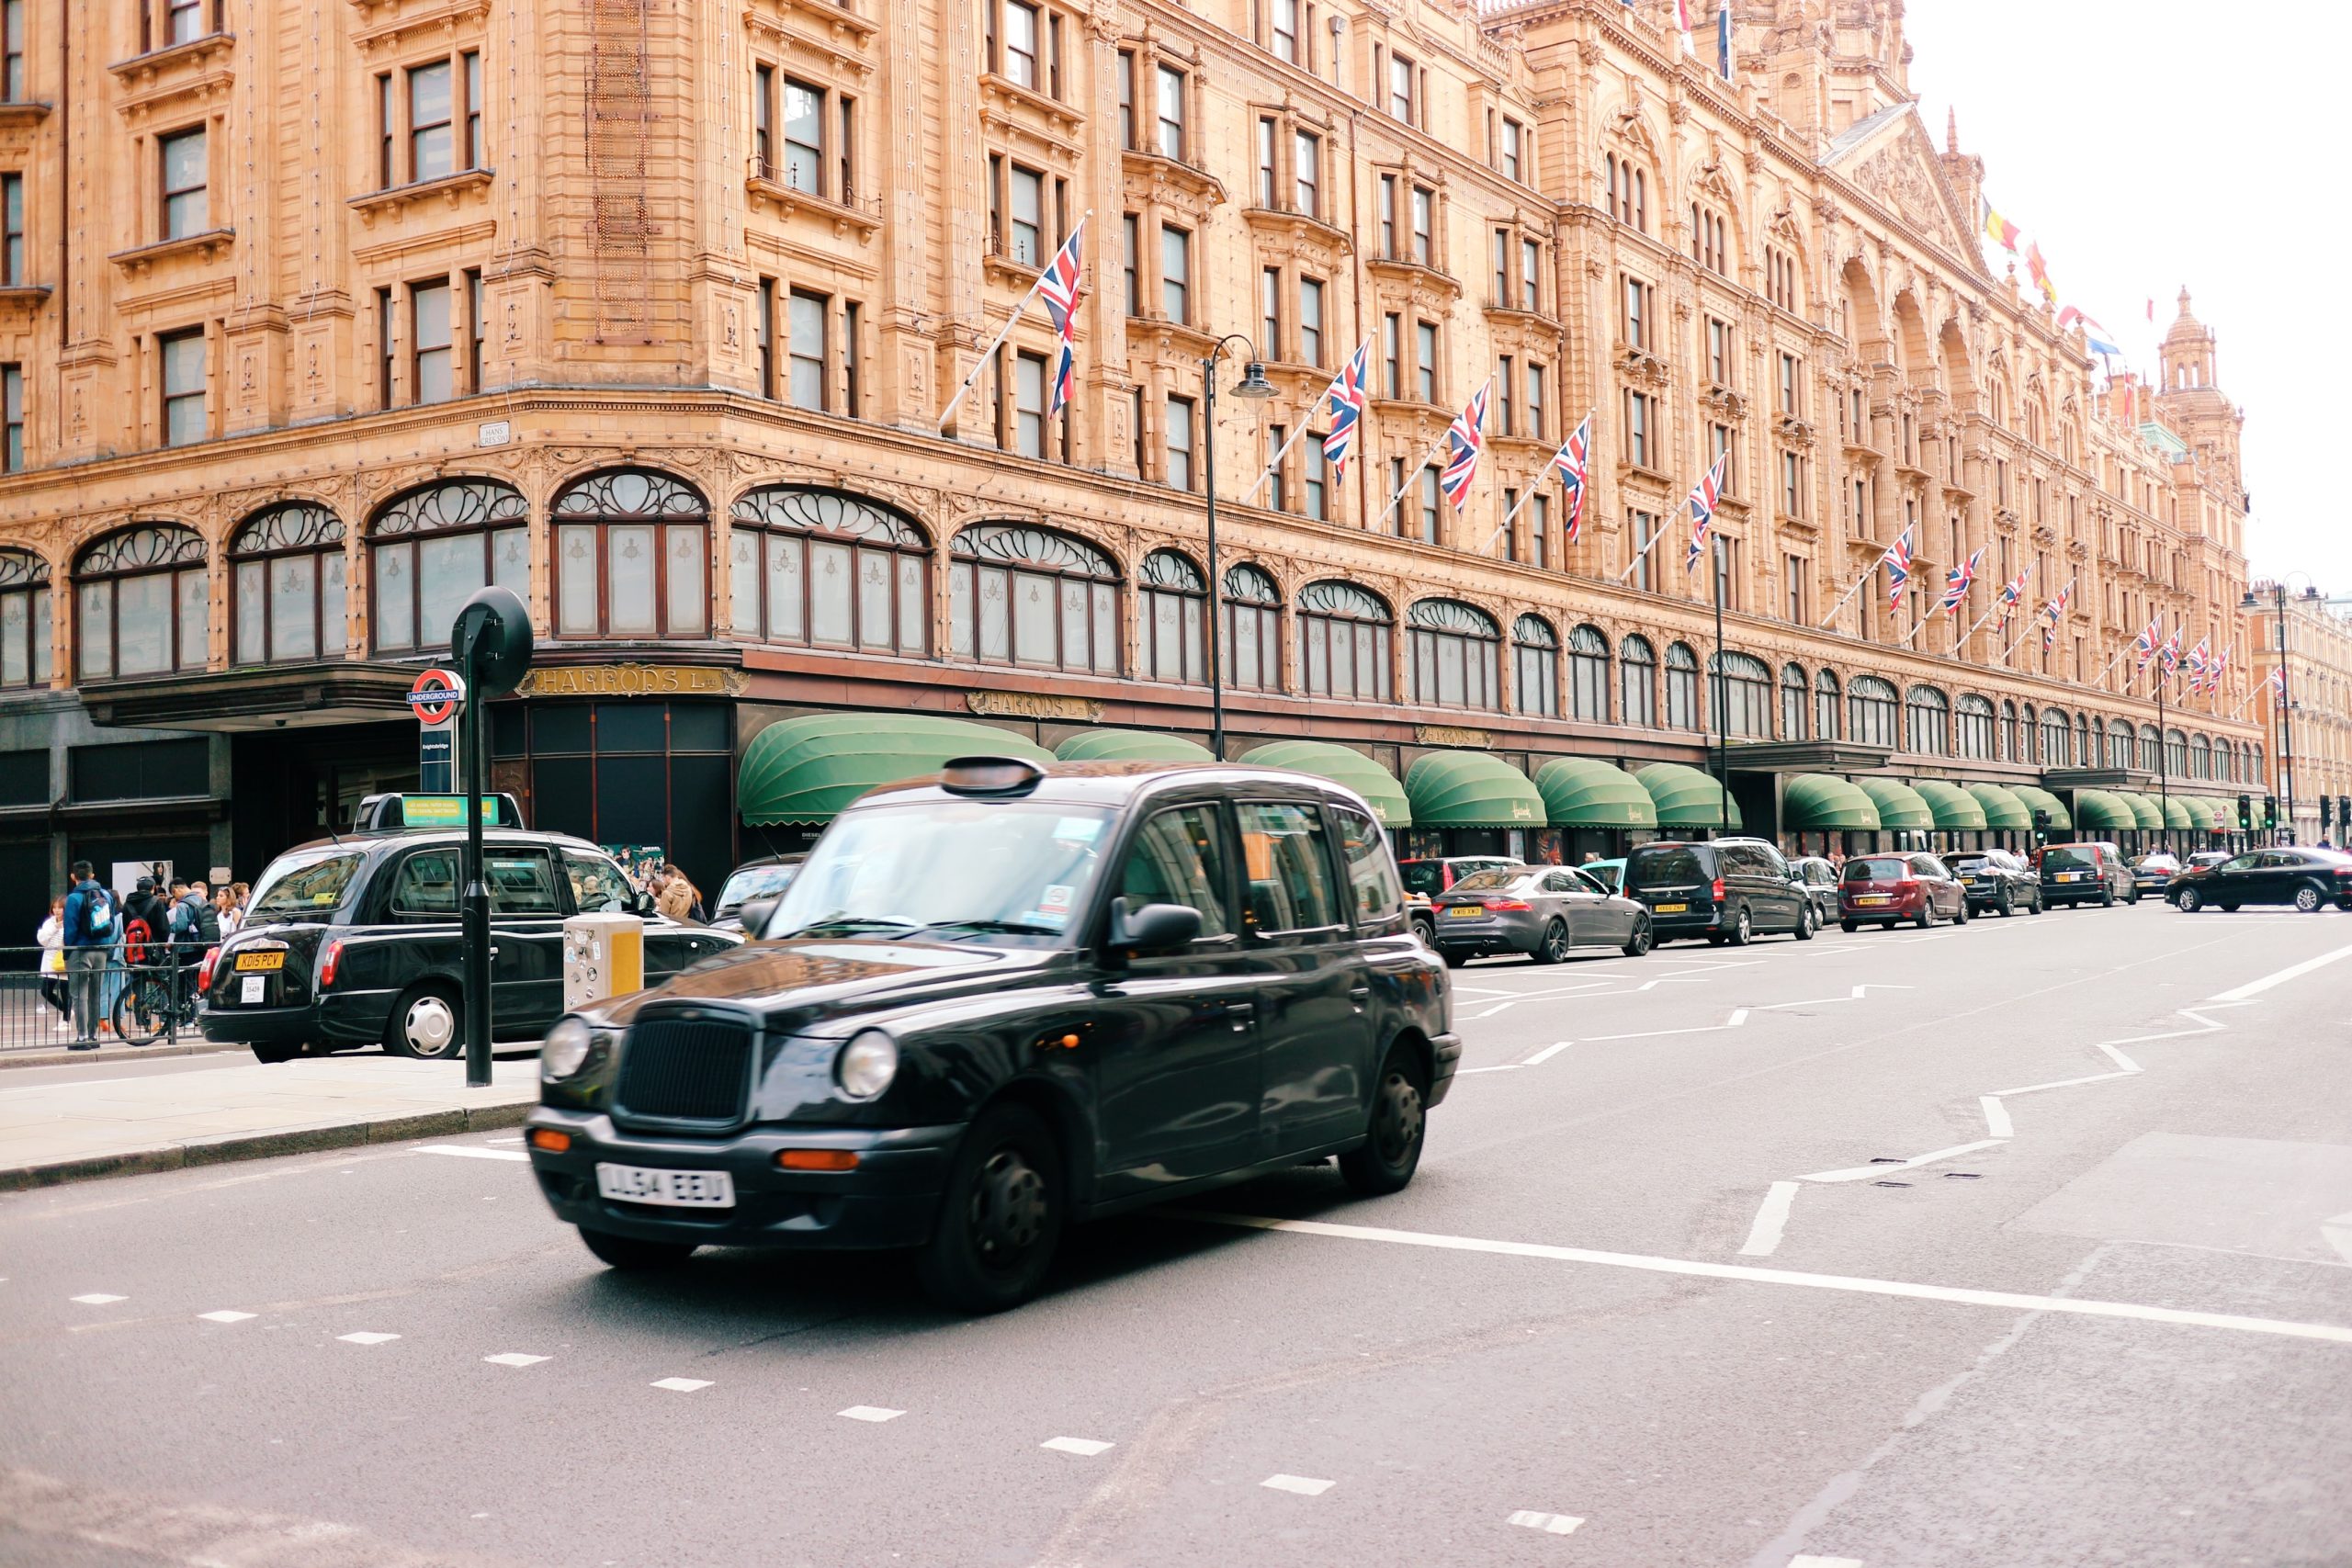 Qatar-owned Harrods records tenfold surge in profits following pandemic slump